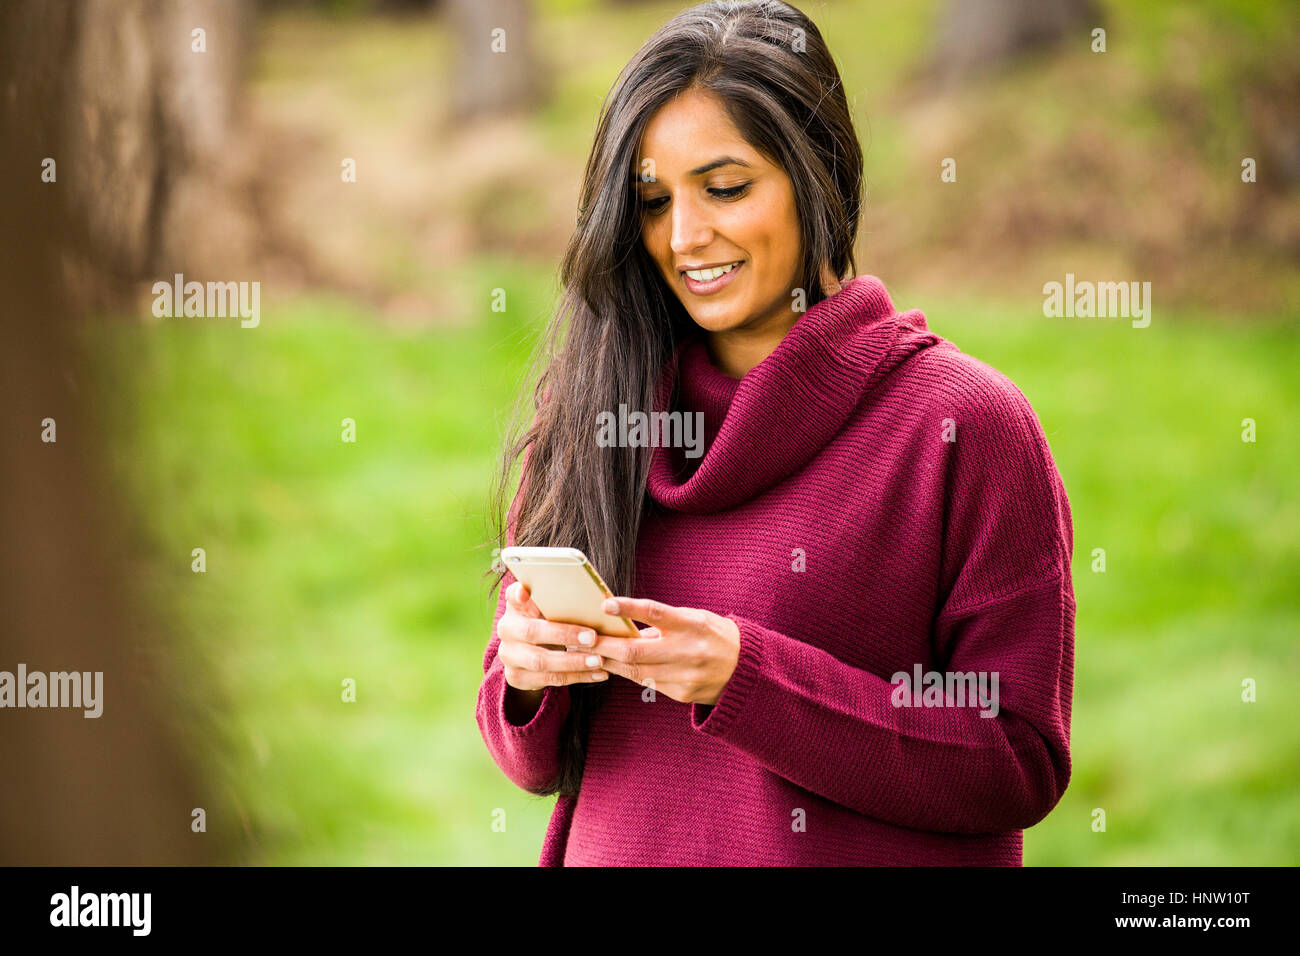 Smiling woman texting on cell phone Banque D'Images